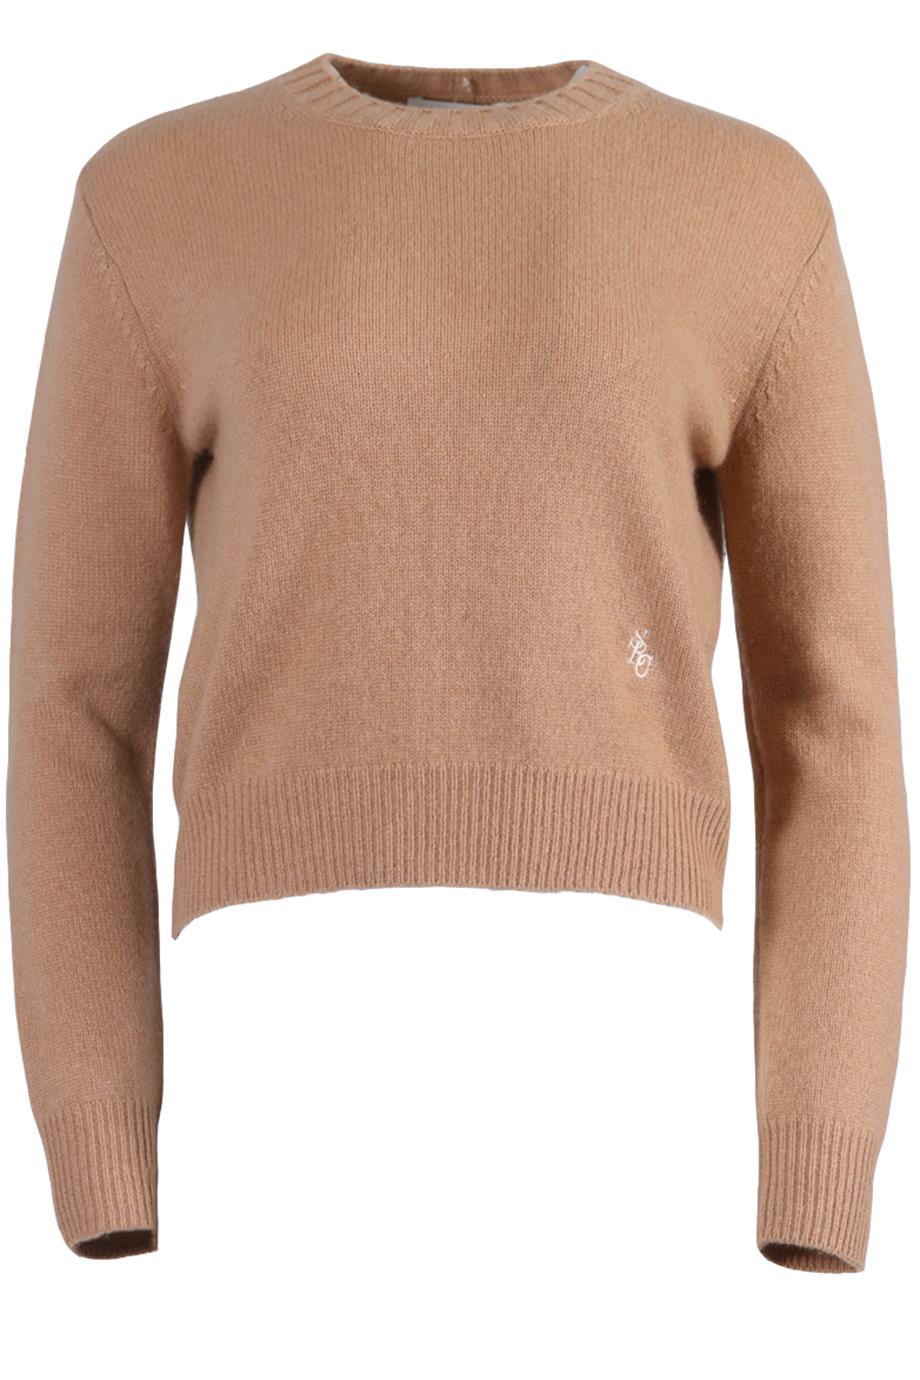 SPORTY & RICH CASHMERE SWEATER XSMALL